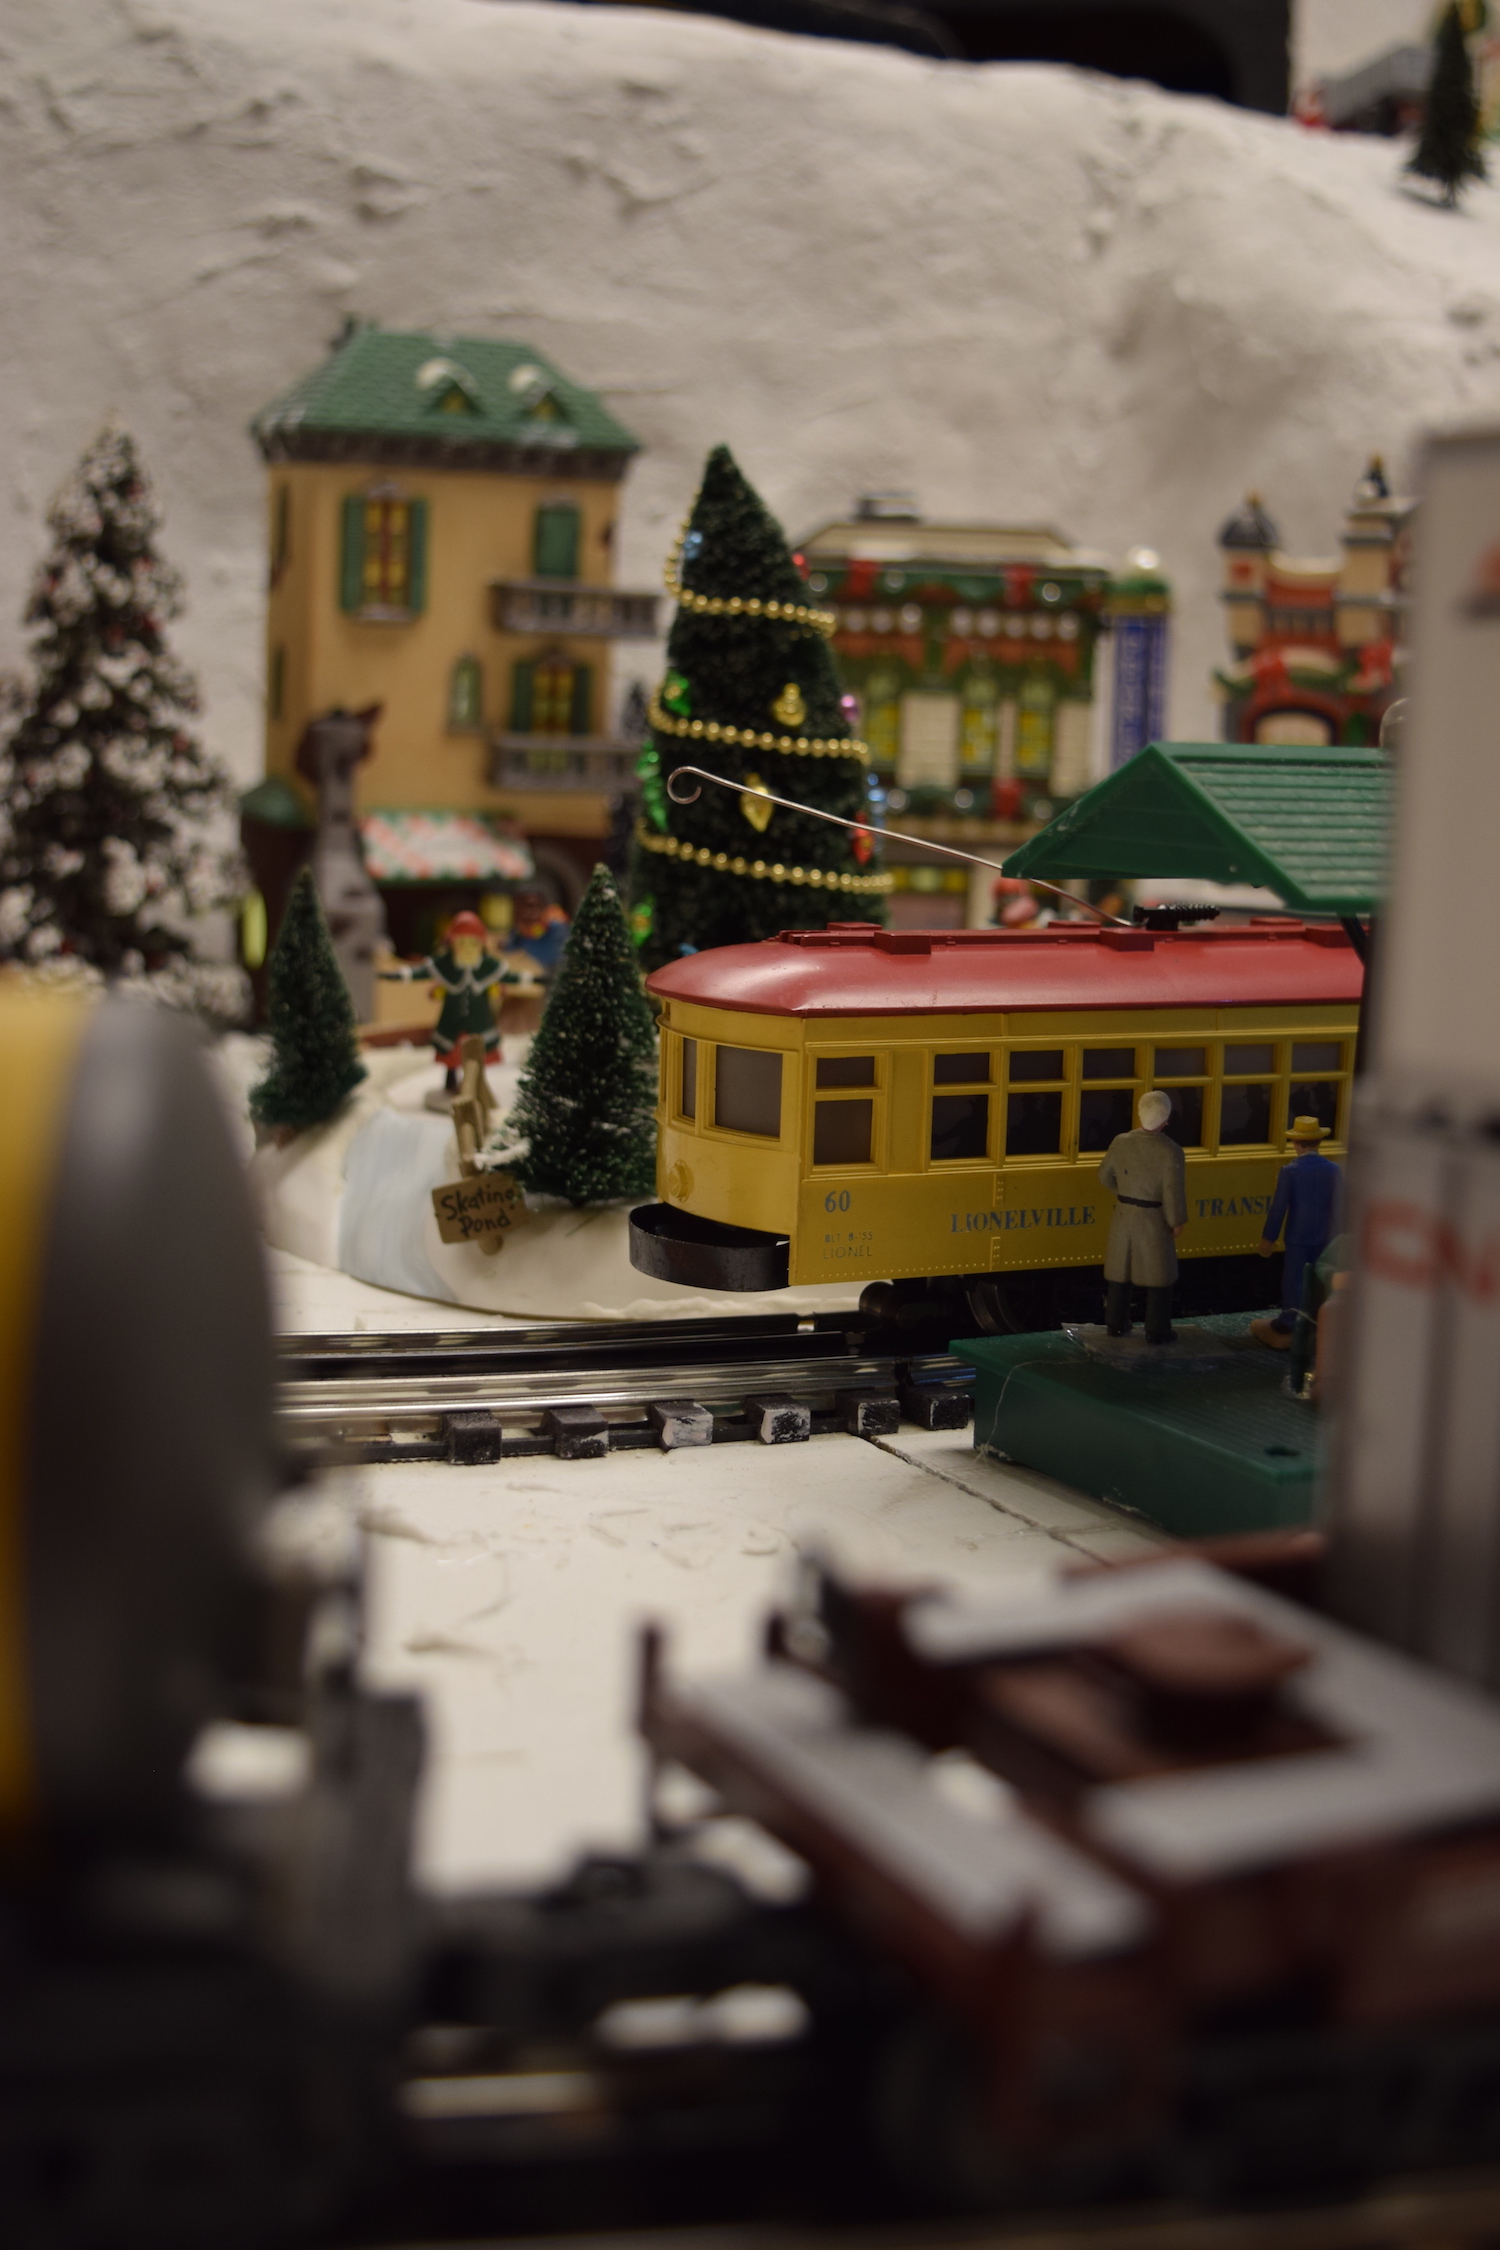 A yellow trolly car - Christmas at the Roundhouse" model train display.